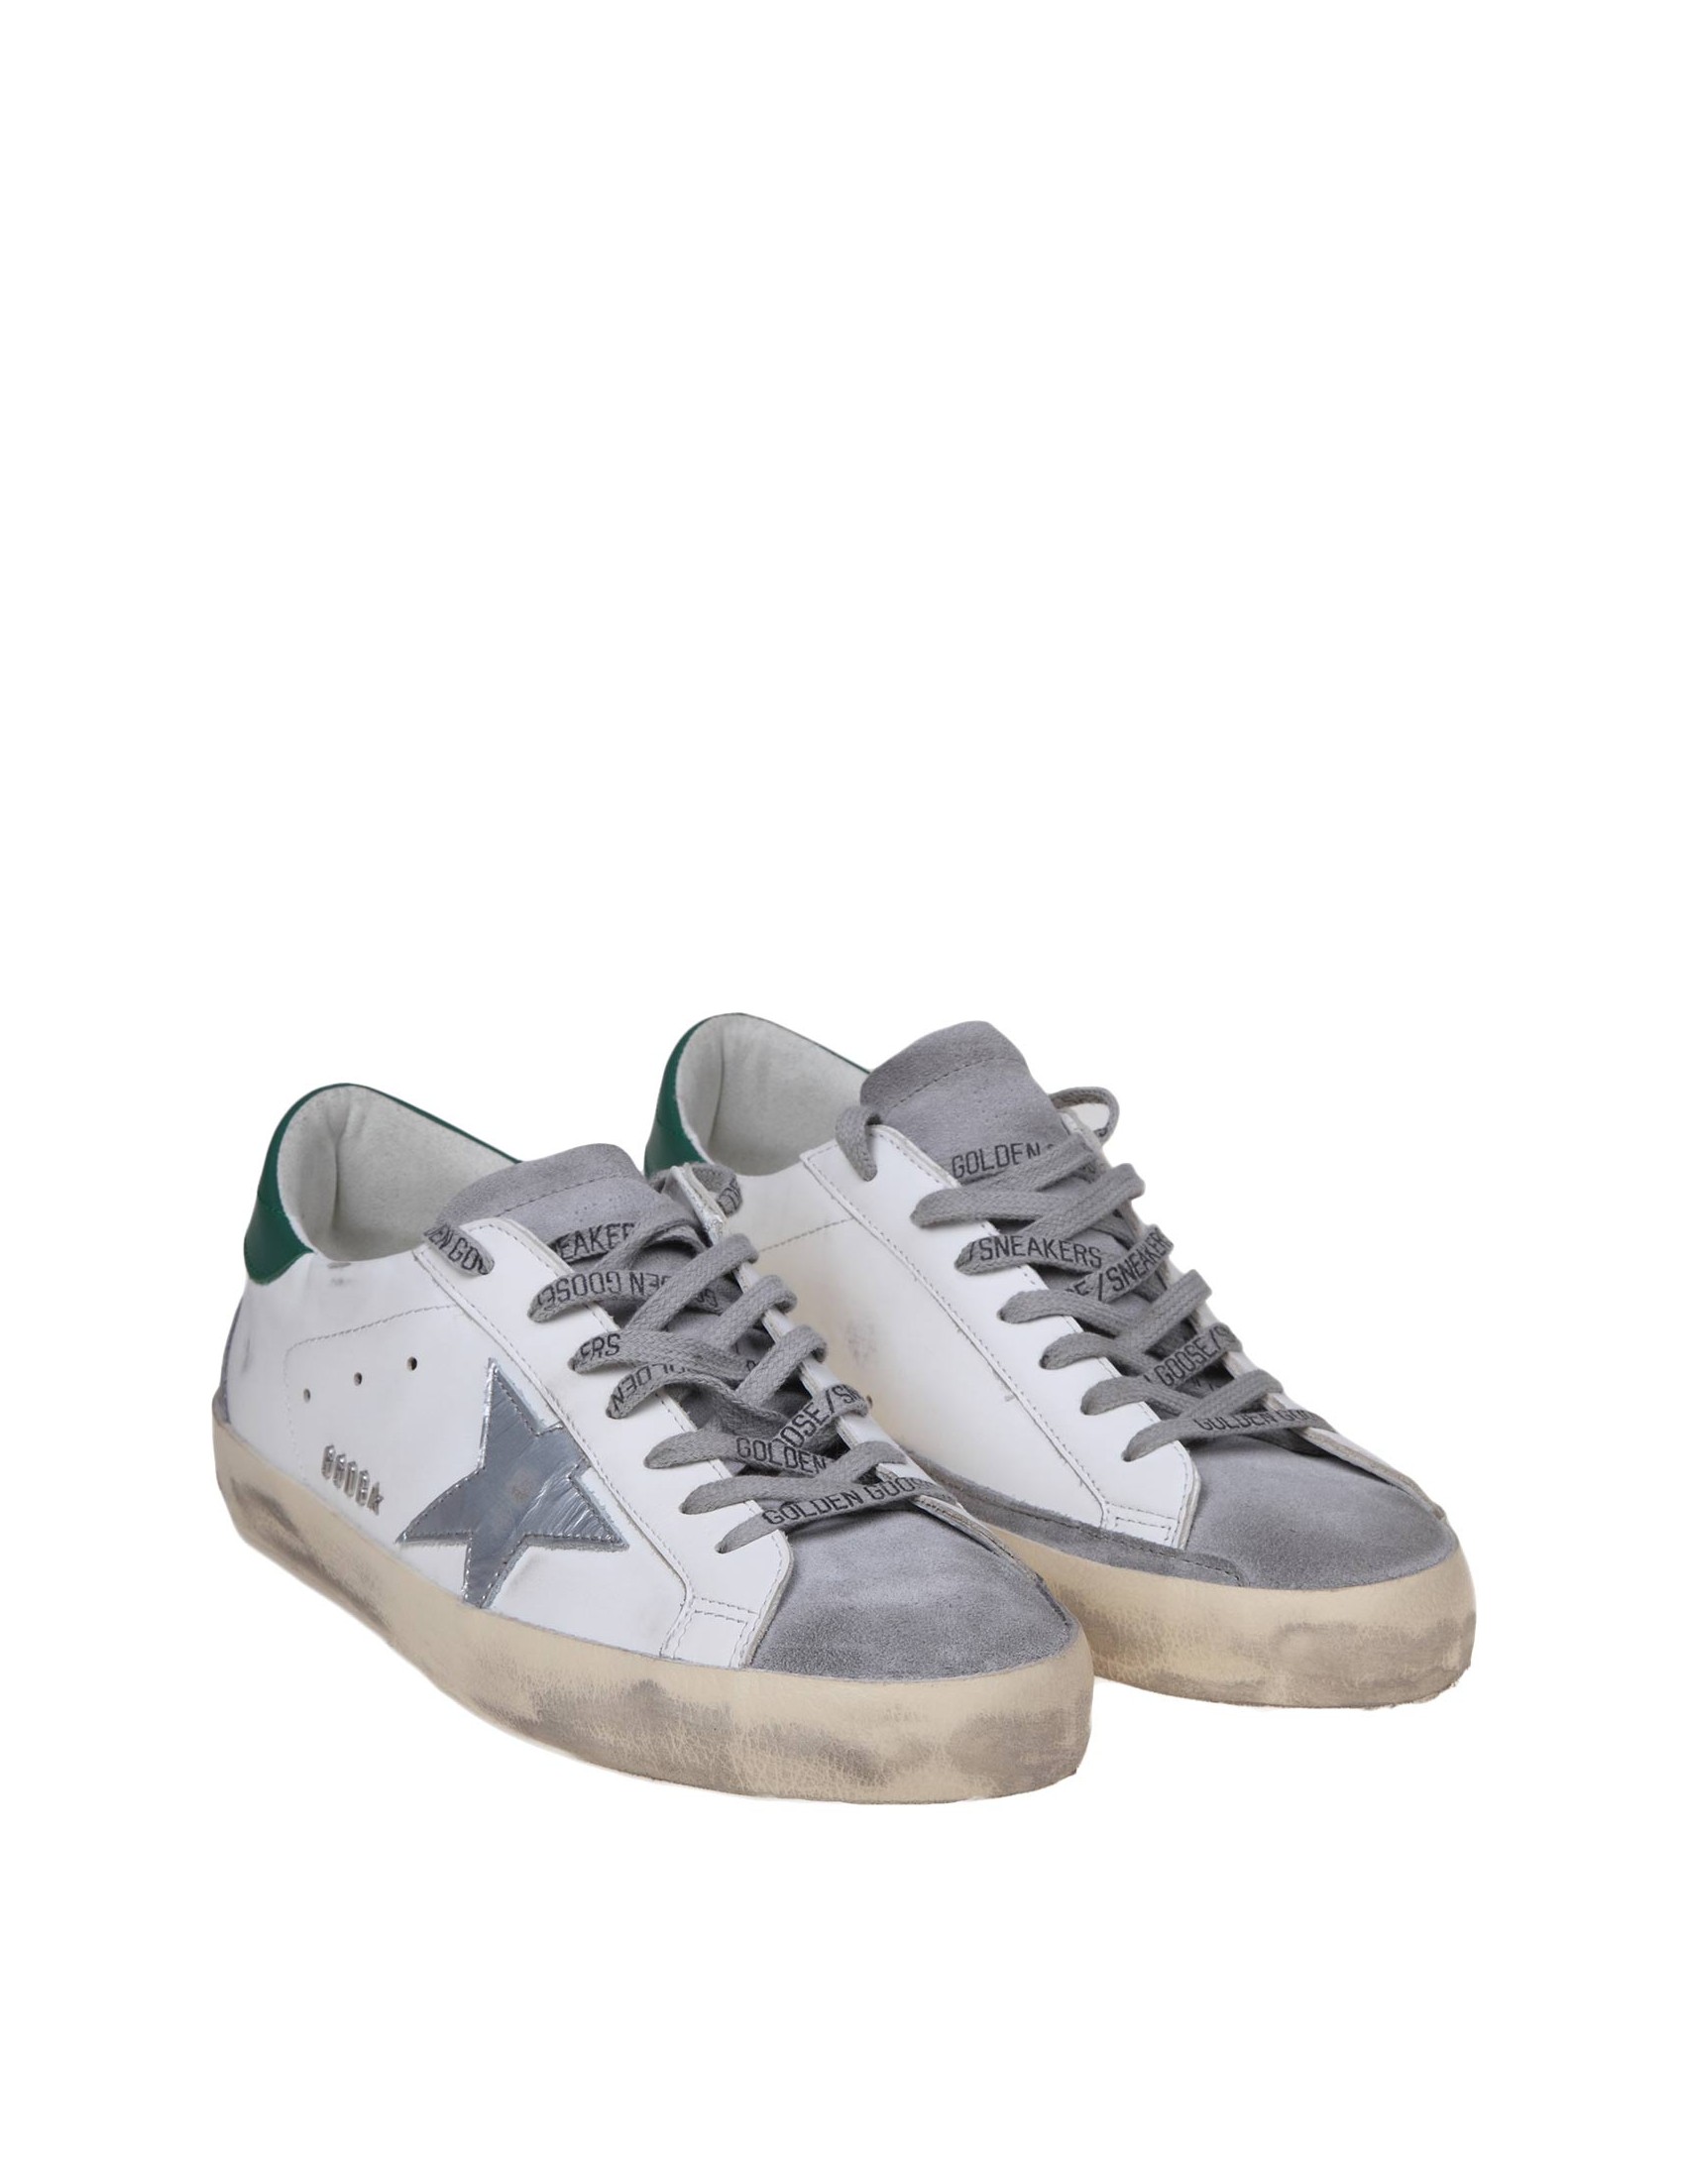 GOLDEN GOOSE SUPER-STAR SNEAKERS IN WHITE AND GREEN LEATHER AND SUEDE